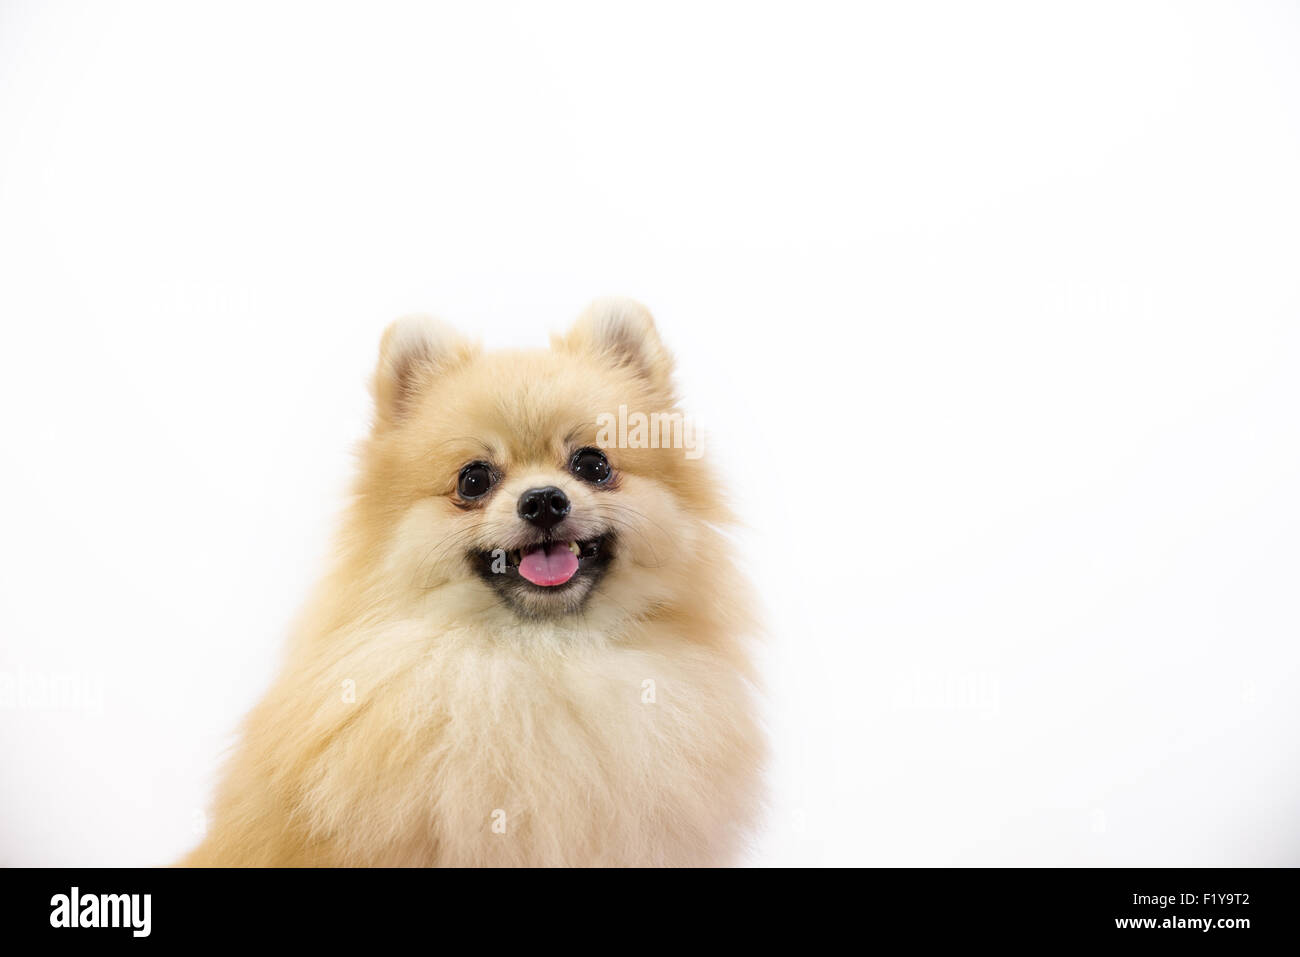 Smiling cute pomeranian at studio on a white background. Stock Photo